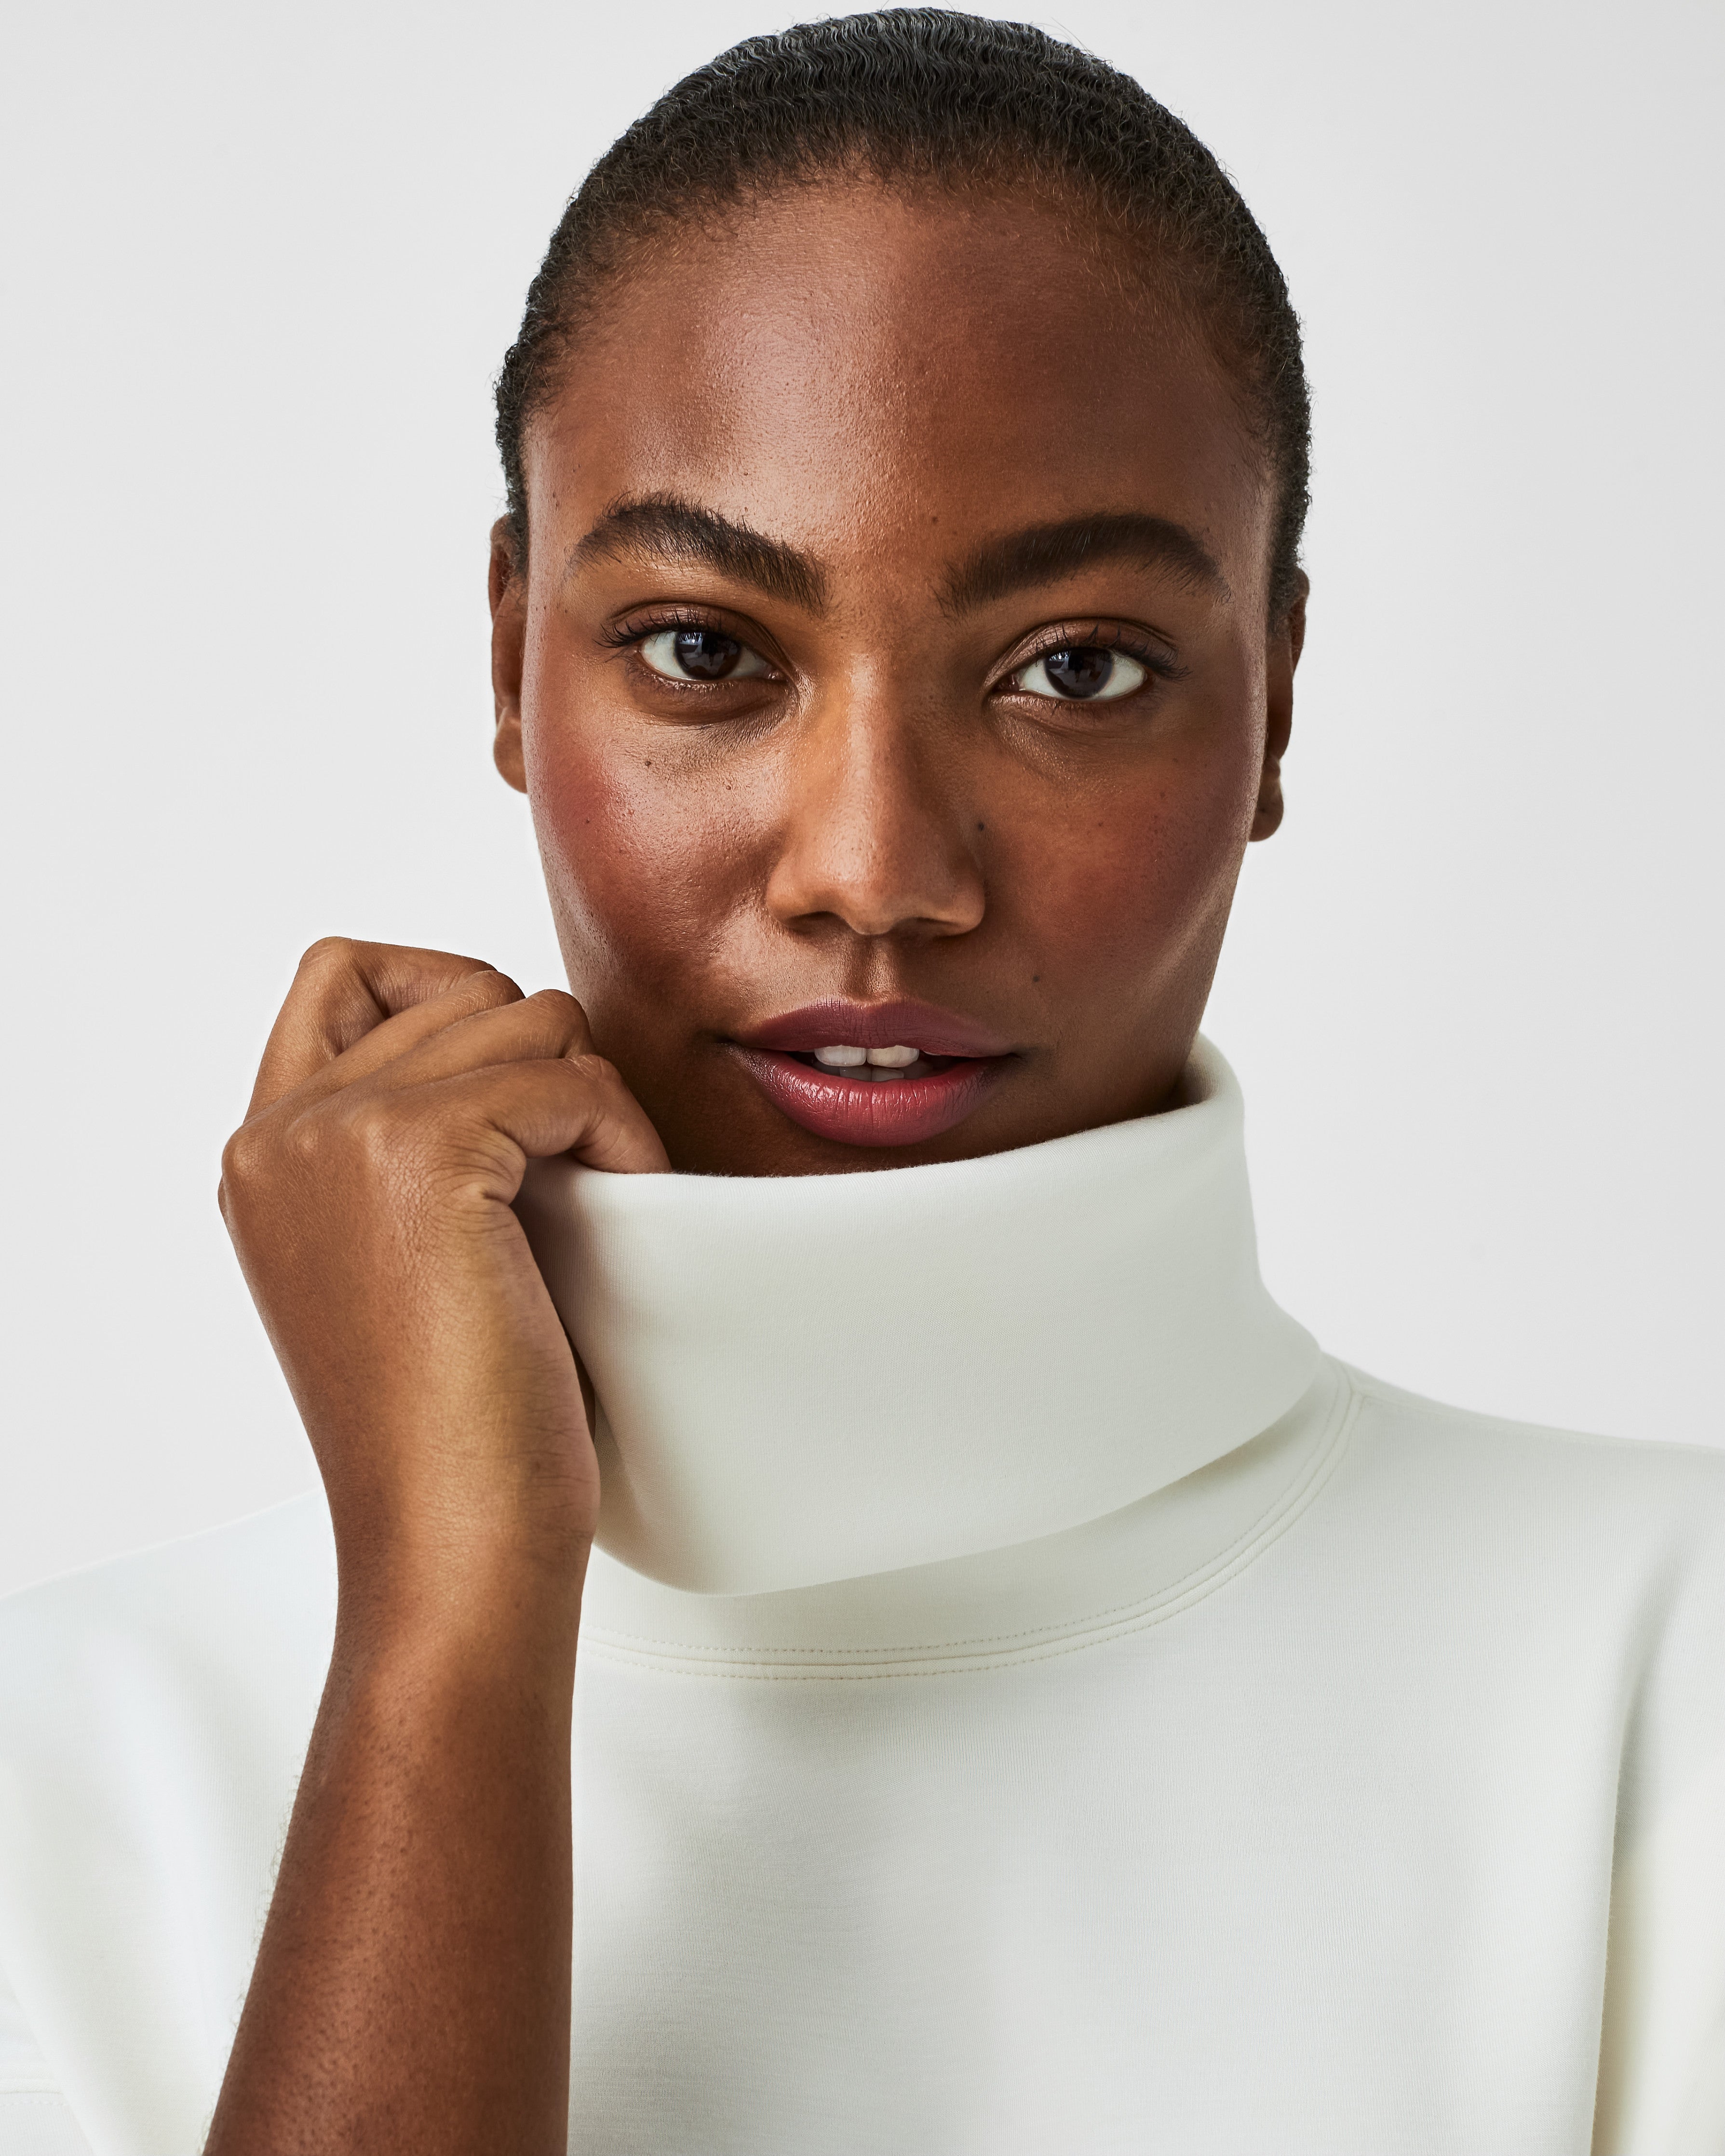 Spanx - you did it again! The new Air Essentials turtleneck tunic